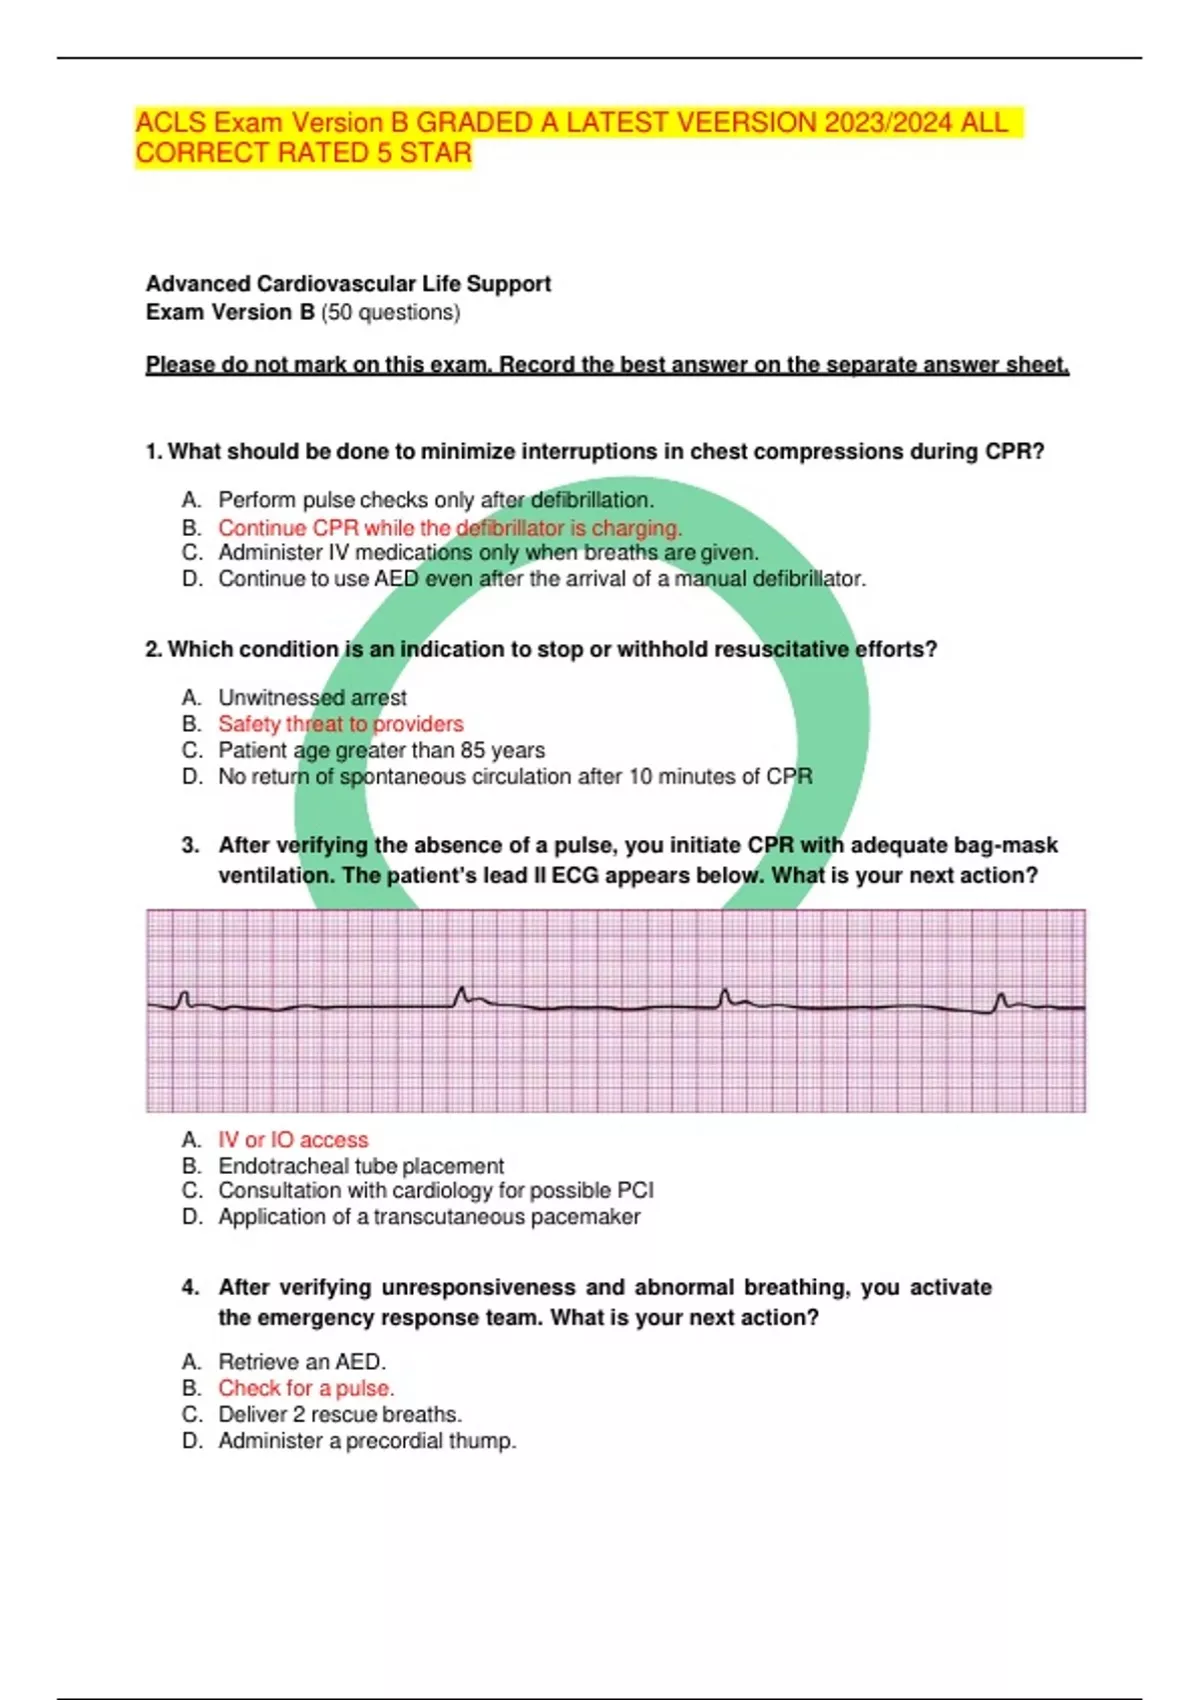 ACLS Exam Version B GRADED A LATEST VEERSION 2023/2024 ALL CORRECT